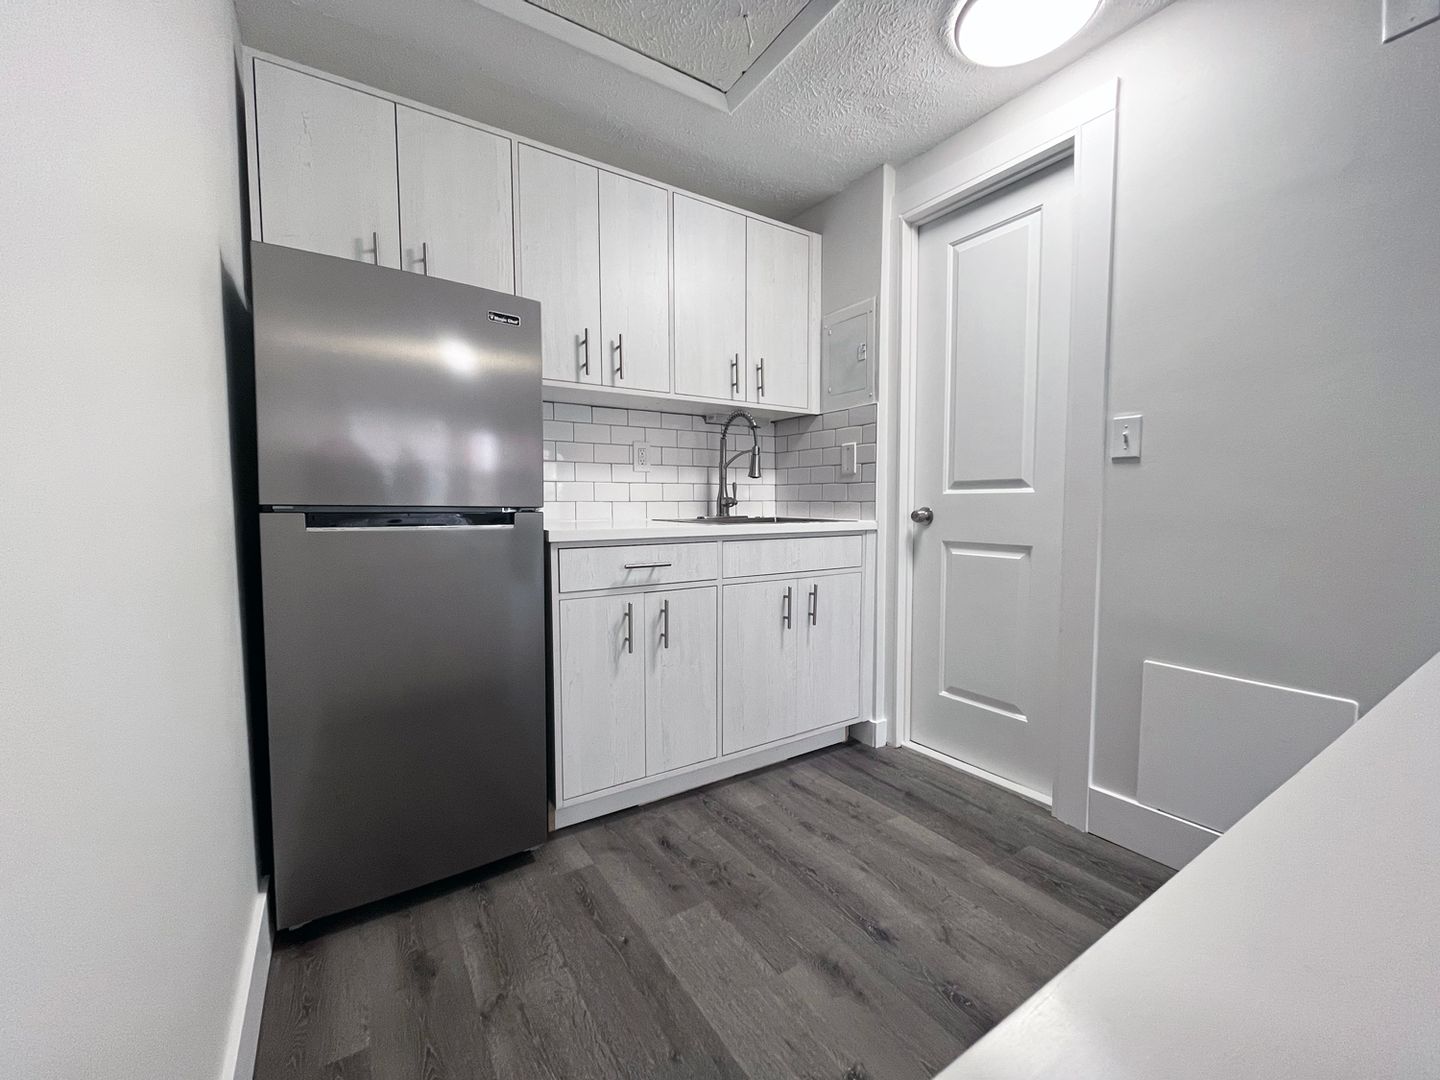 1 Bed and 1 Bath Apartments for Rent | Entirely Renovated Units | Columbus | Ohio #43232 Image